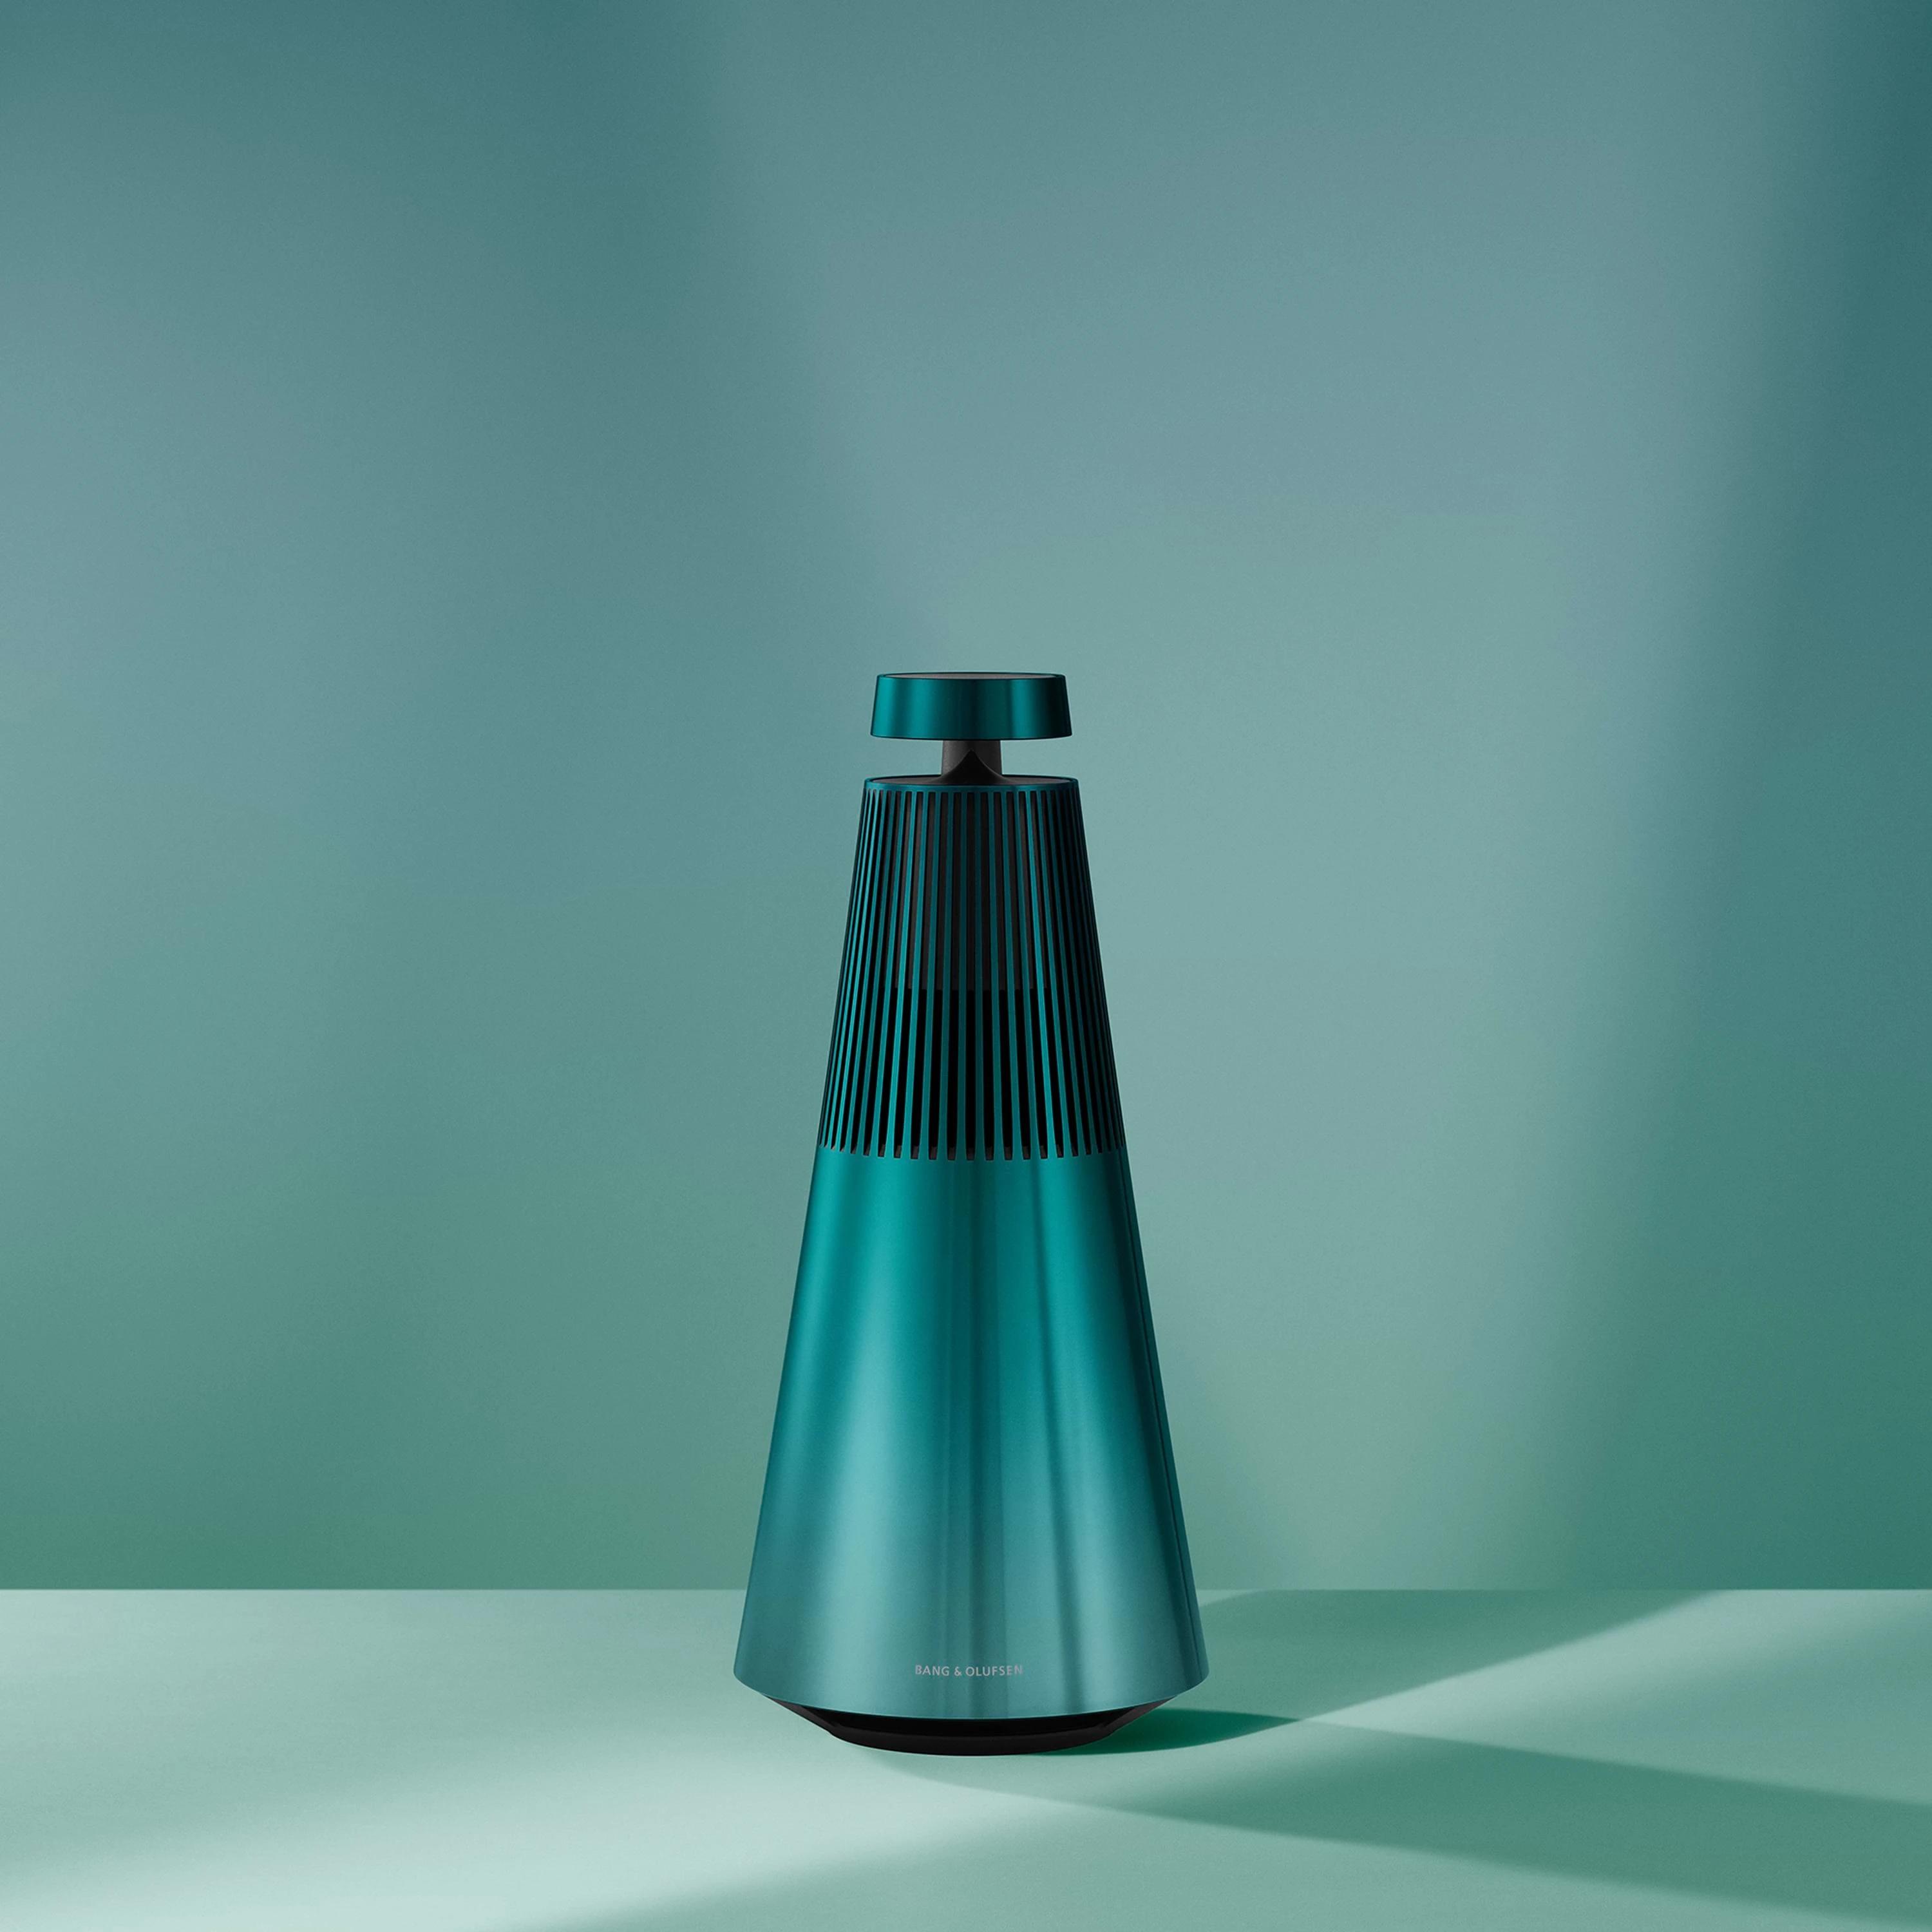 Image of Beosound 2 speaker in the colour Northern Sky Turquoise